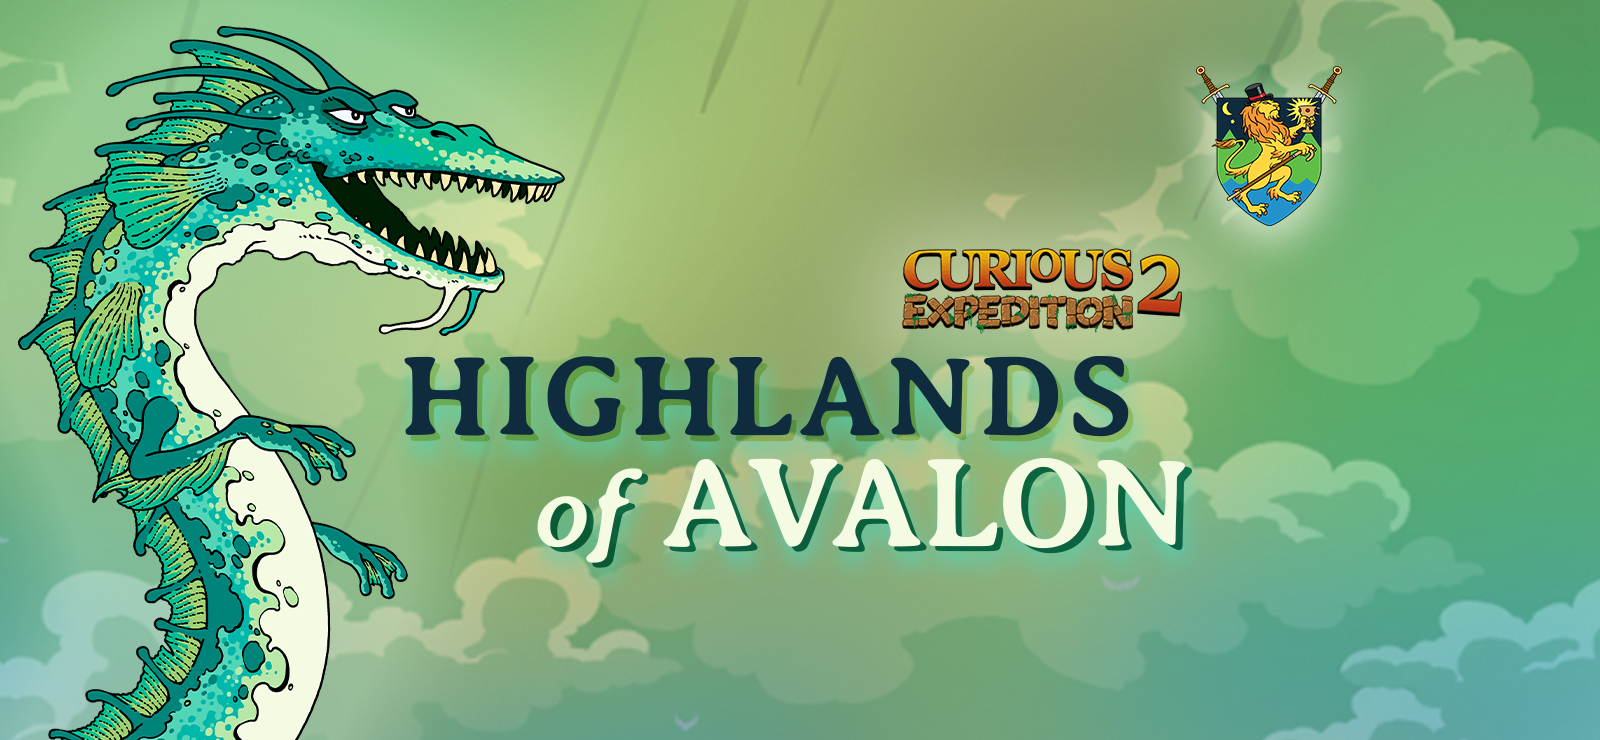 Curious Expedition 2 - Highlands Of Avalon